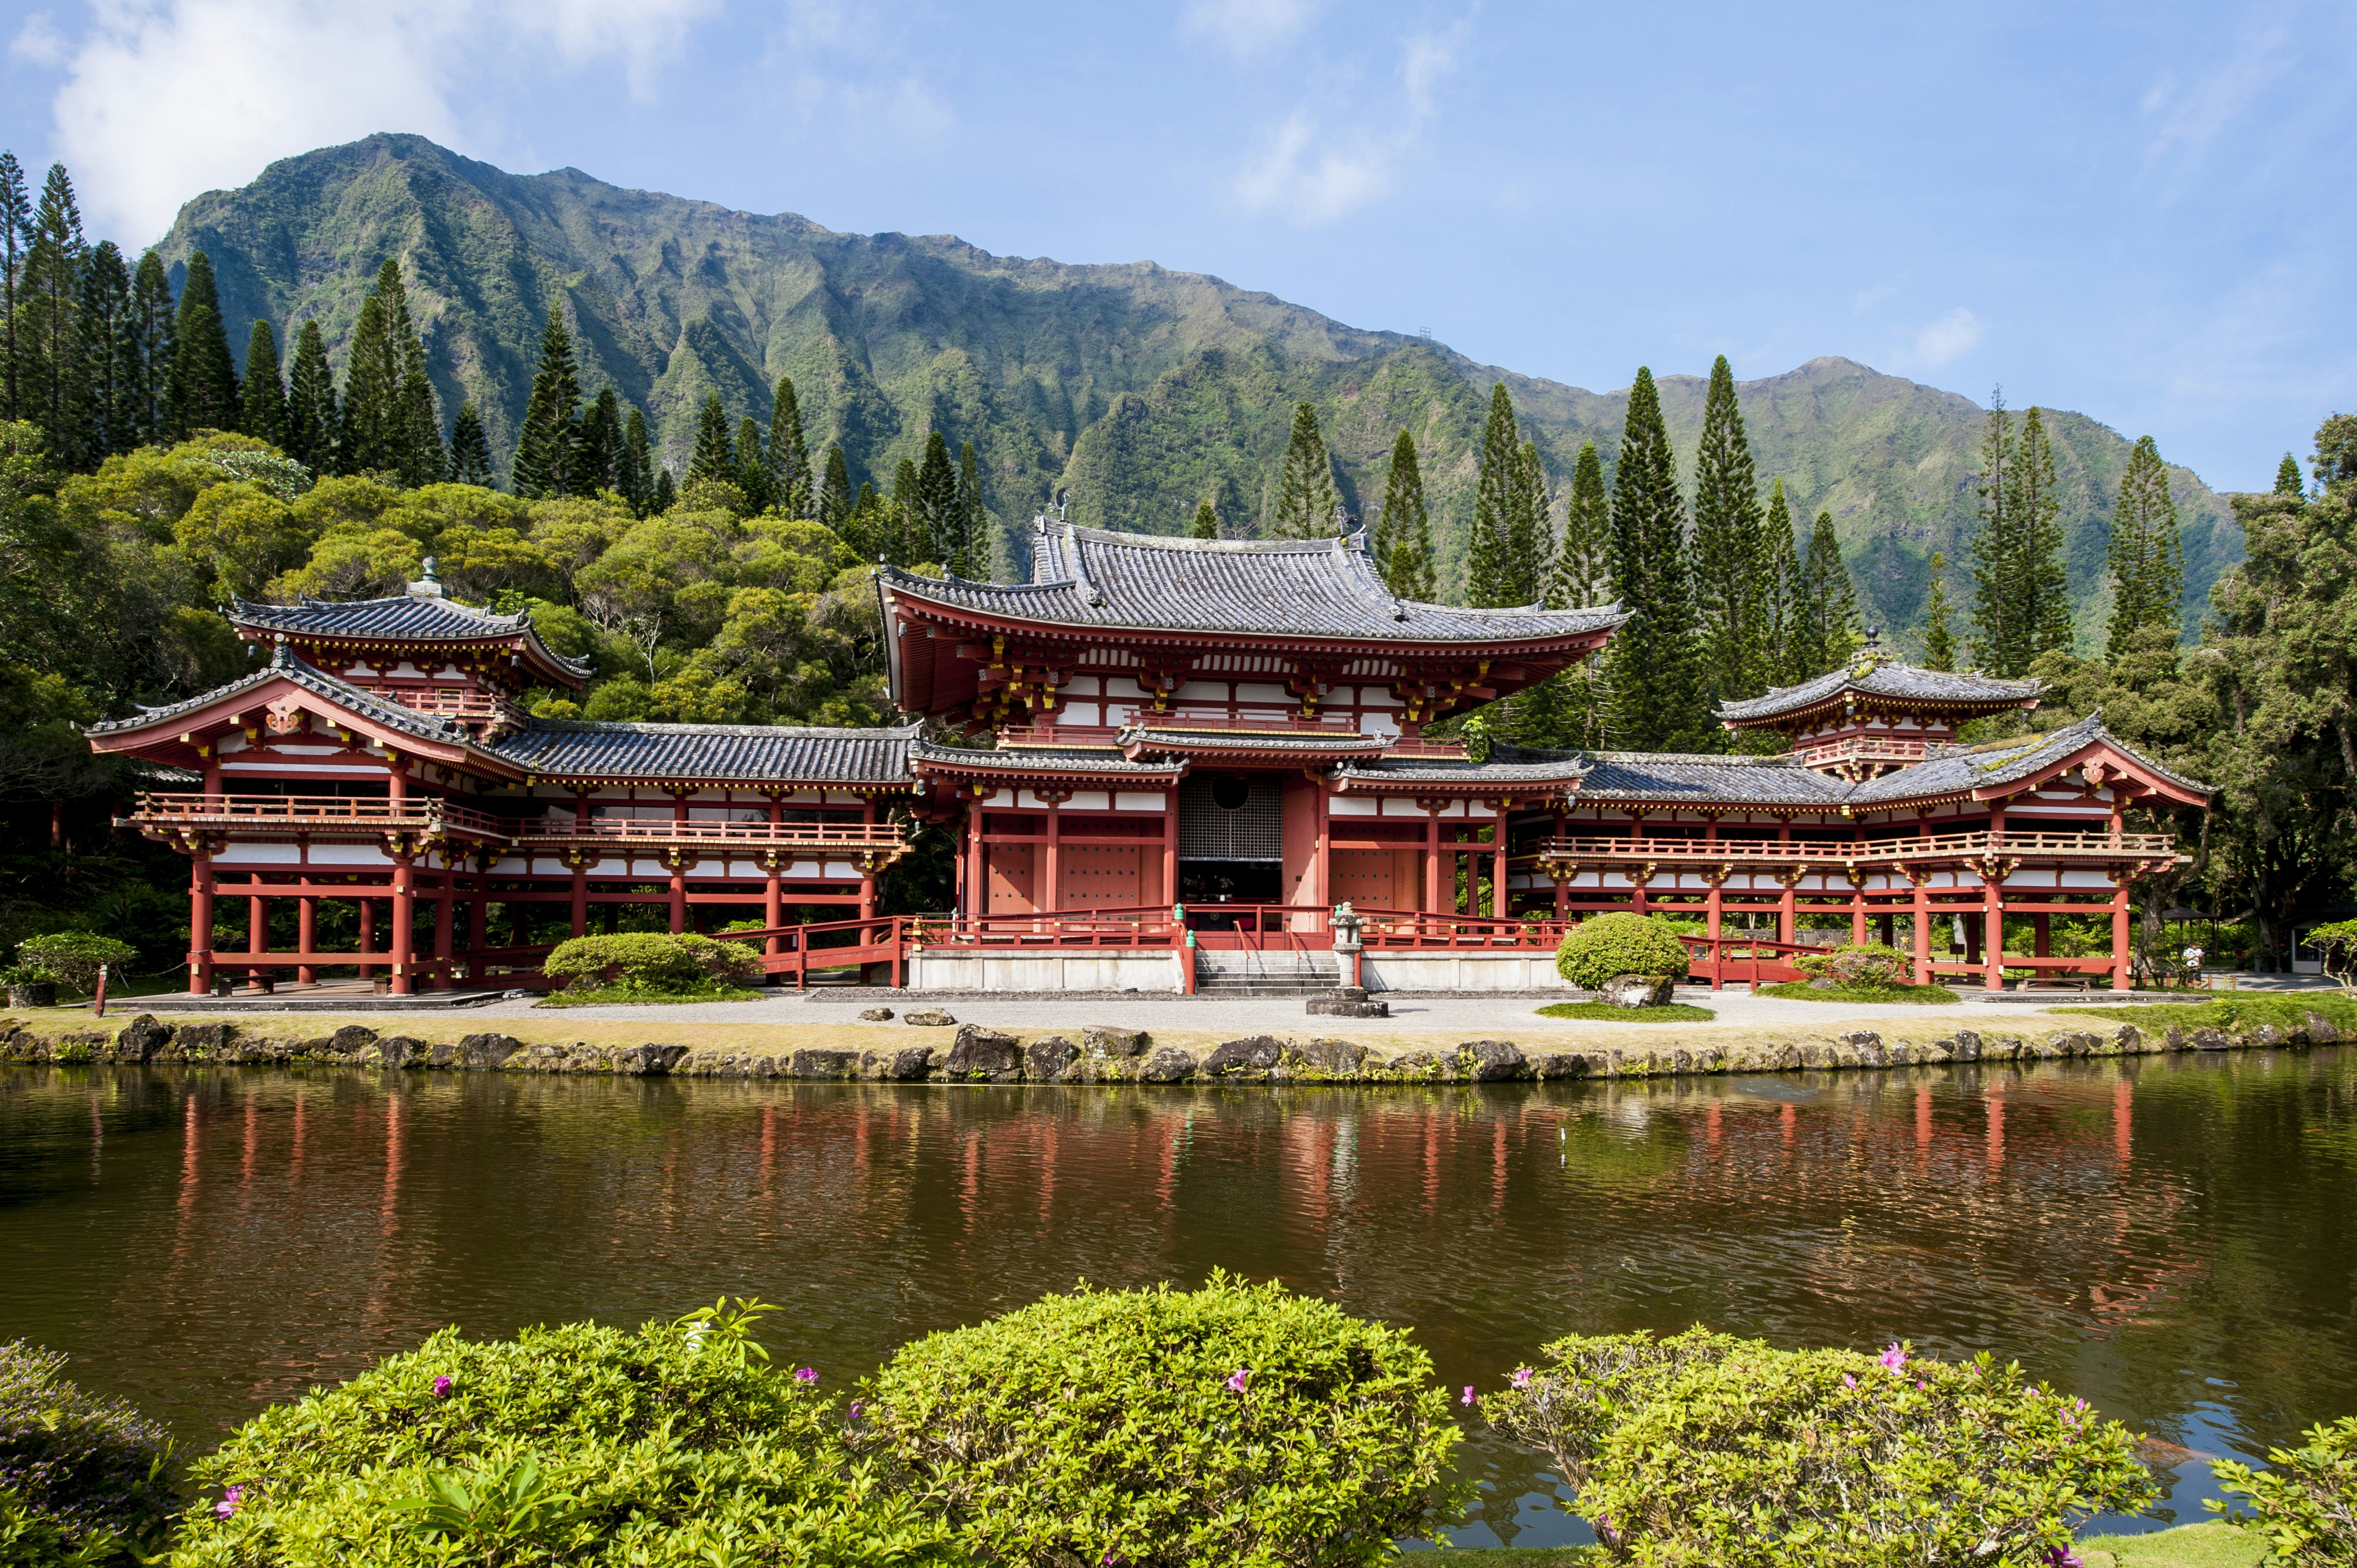 A Japanese temple, resplendent in reds and golds, is set in a groomed park at the base of a mountain in O'ahu